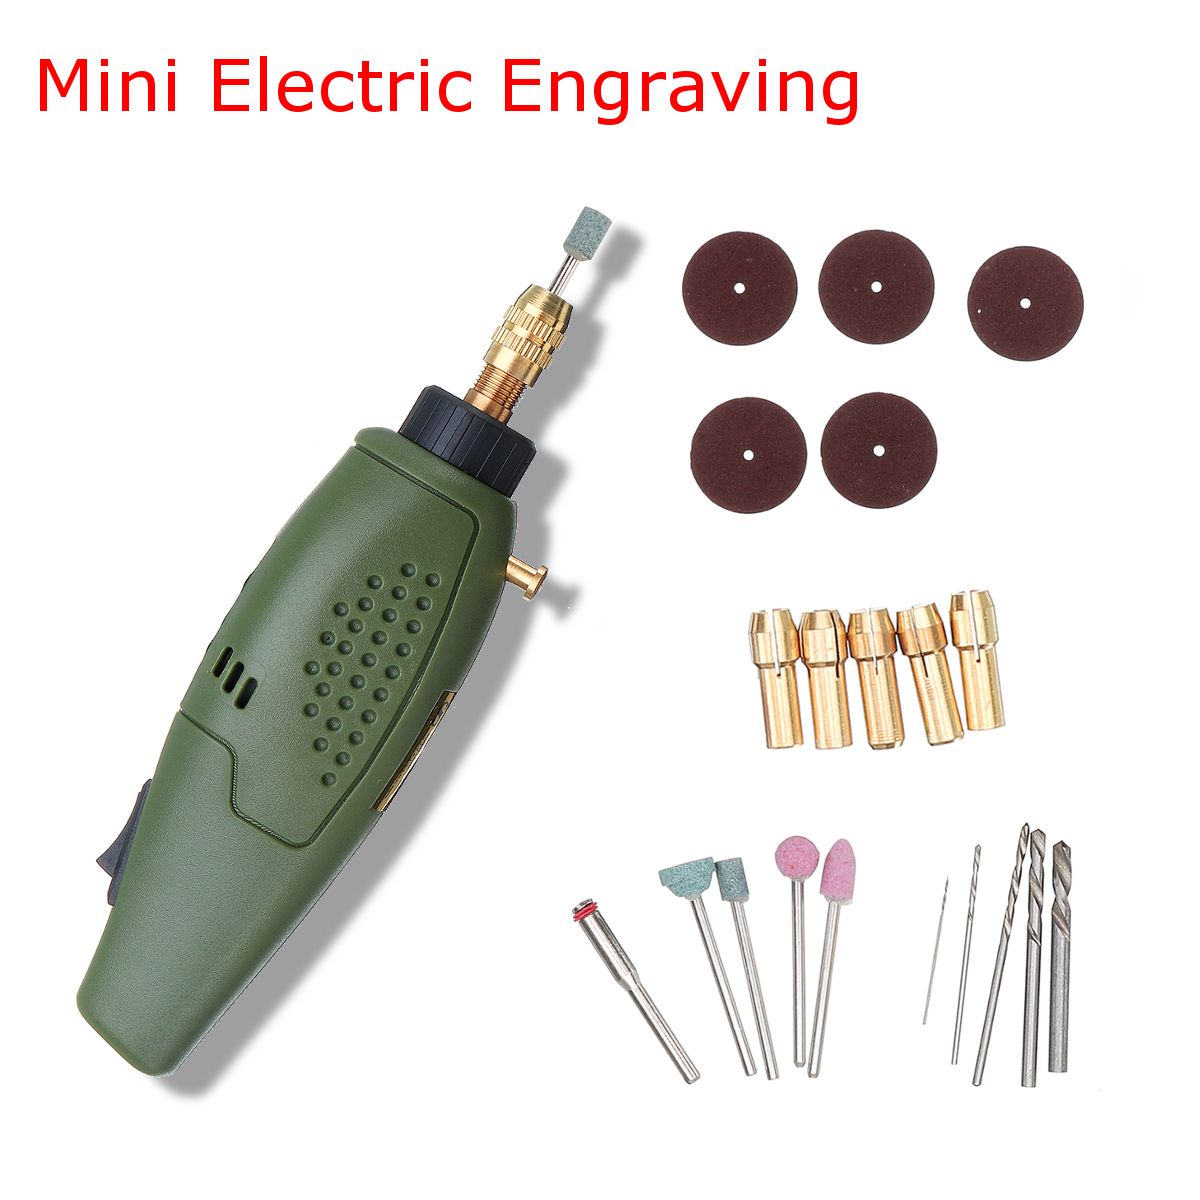 10W-12V-Electric-Engraving-Pen-Rotary-Tool-Kit-Hand-Drill-Grinder-Grinding-Carving-Tool-1297889